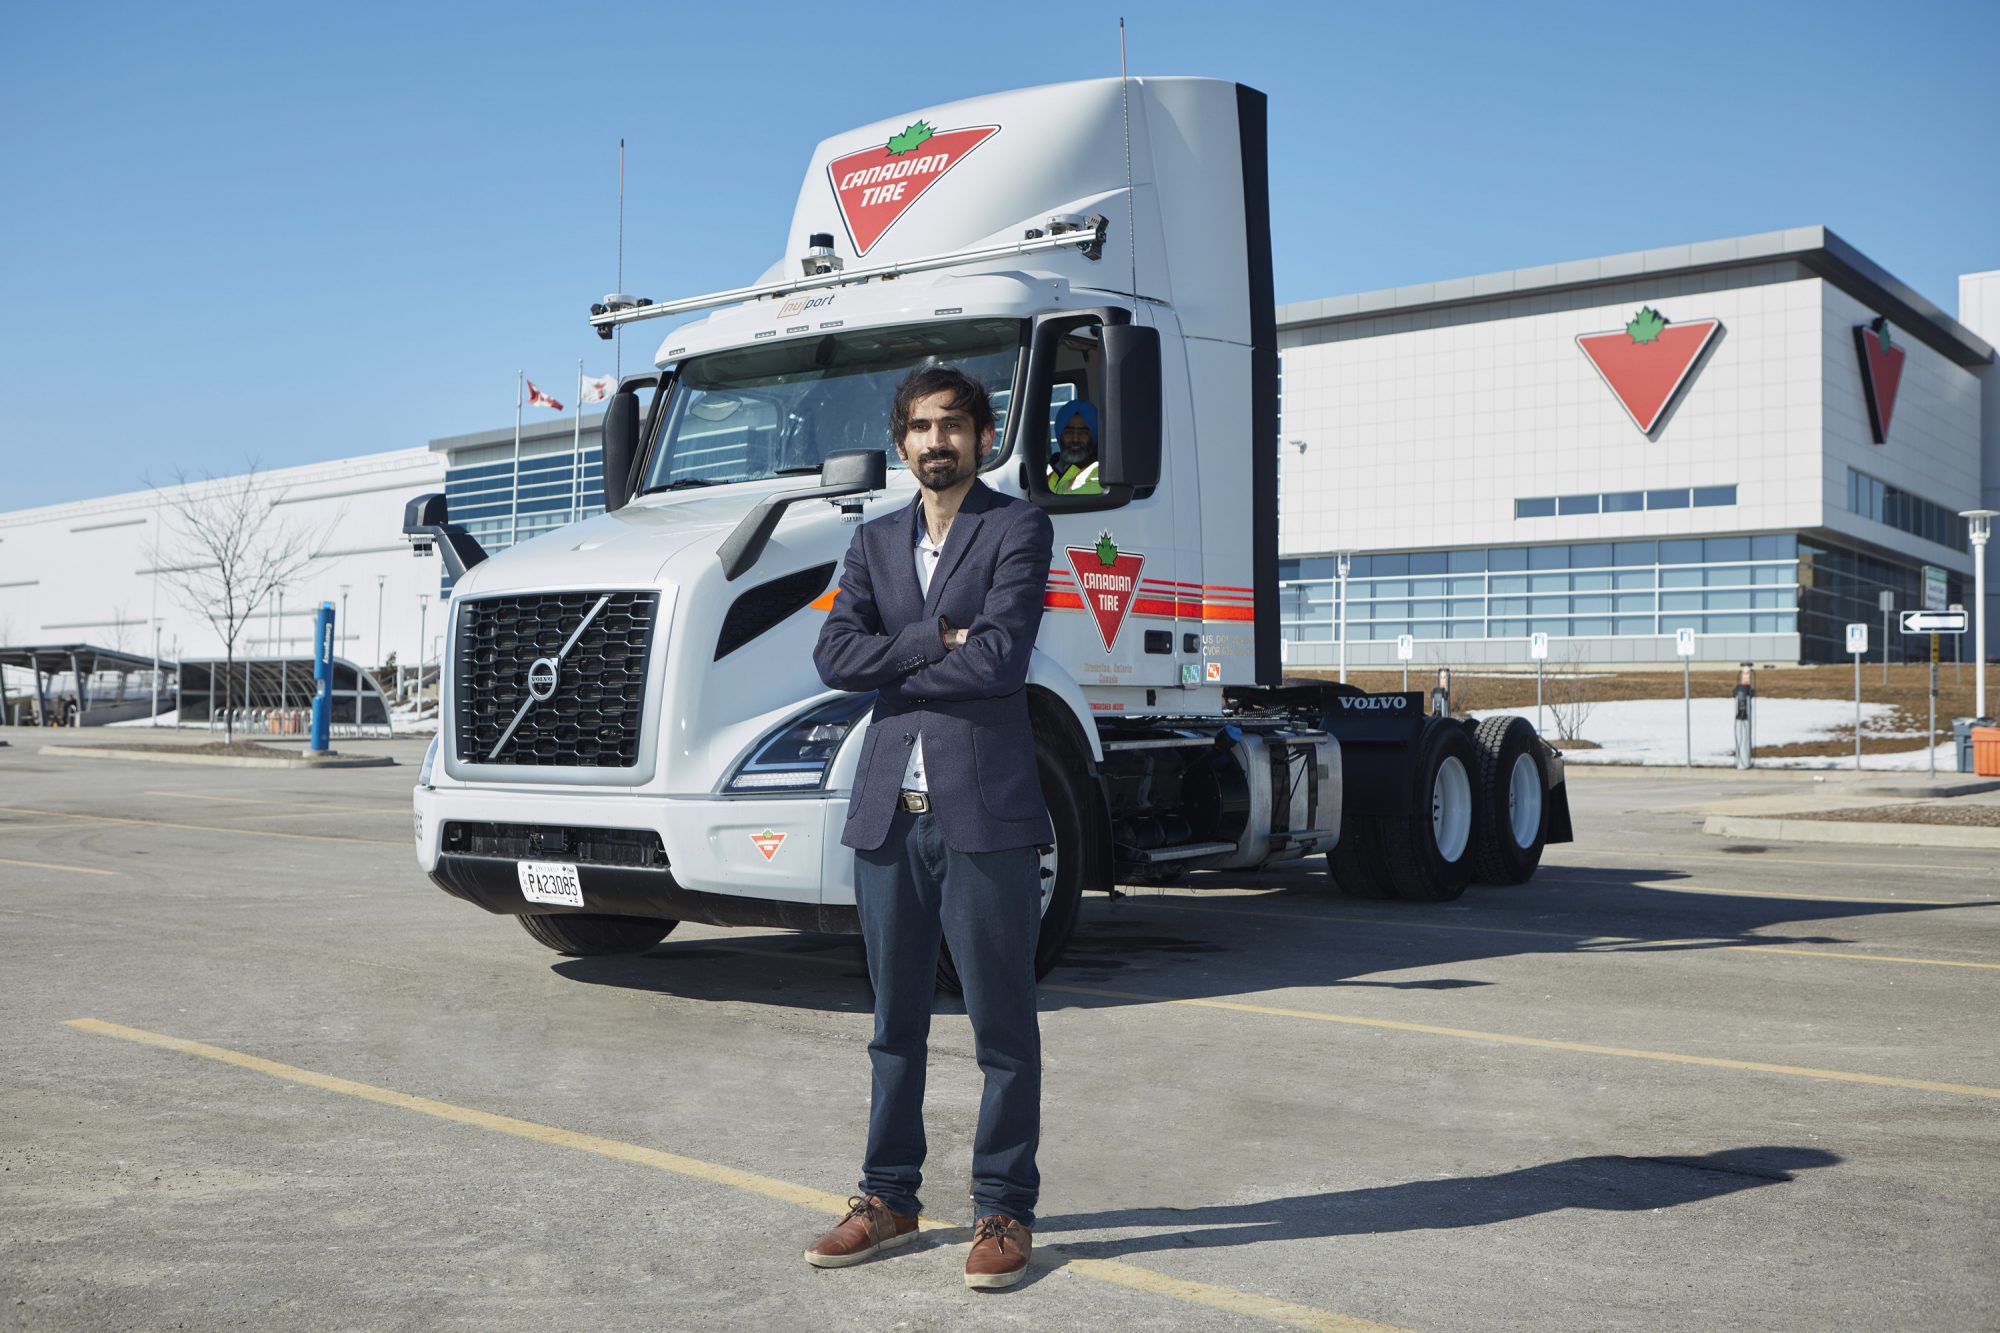 Canadian Tire, Toronto startup and Ontario government invest $3 million in automated trucking tech